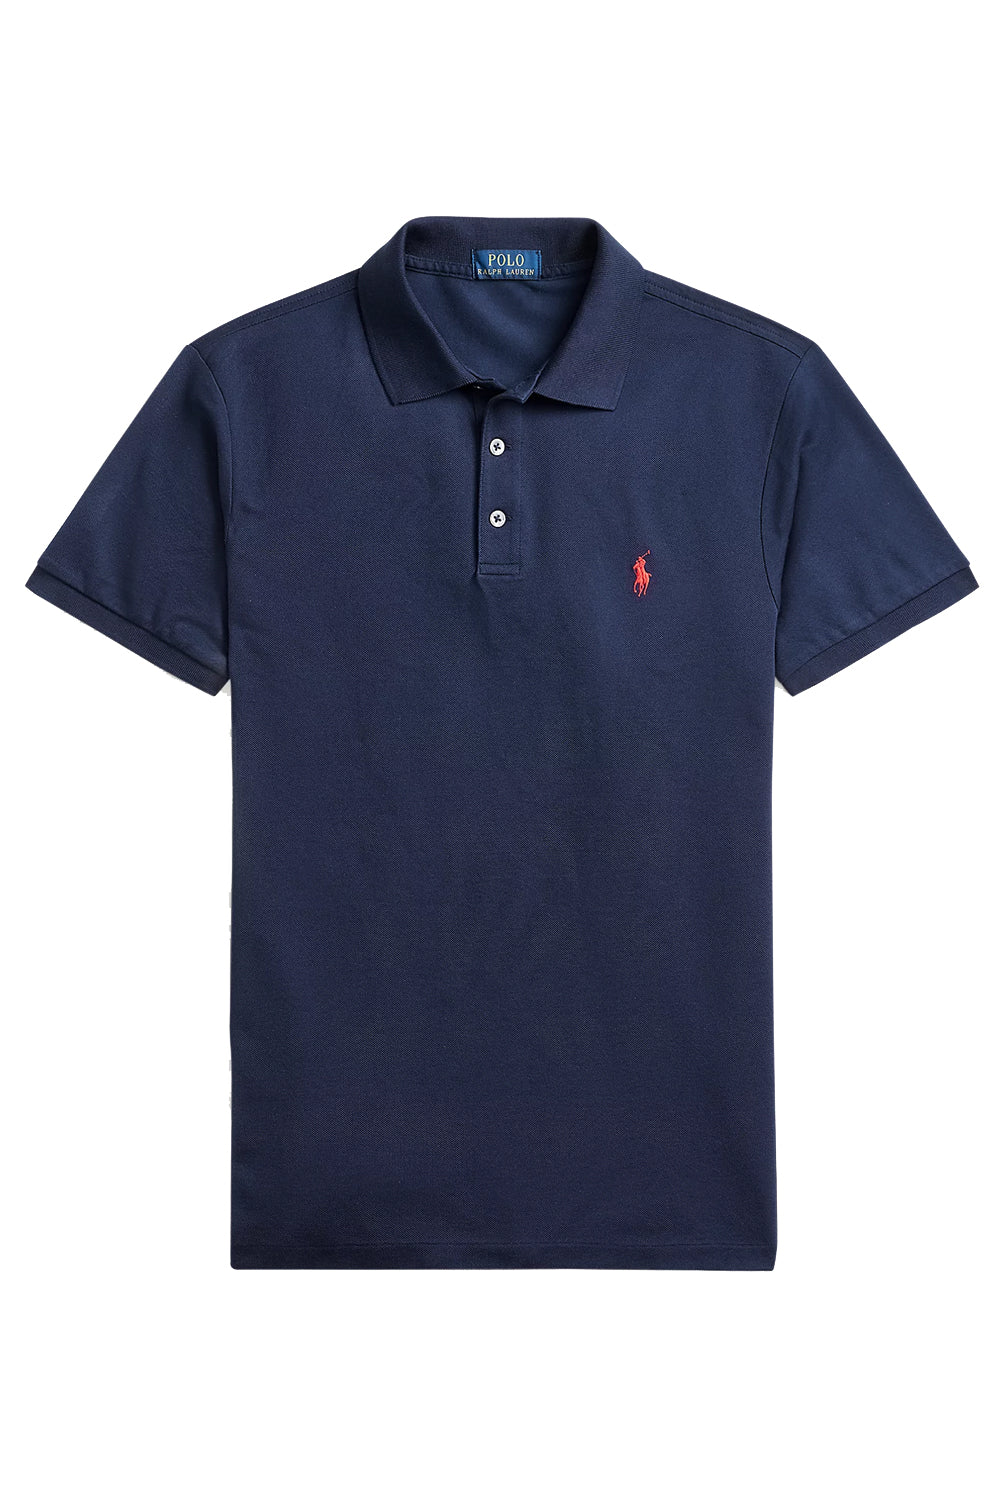 Image of POLO RALPH LAUREN Polo in piqué stretch Slim-Fit